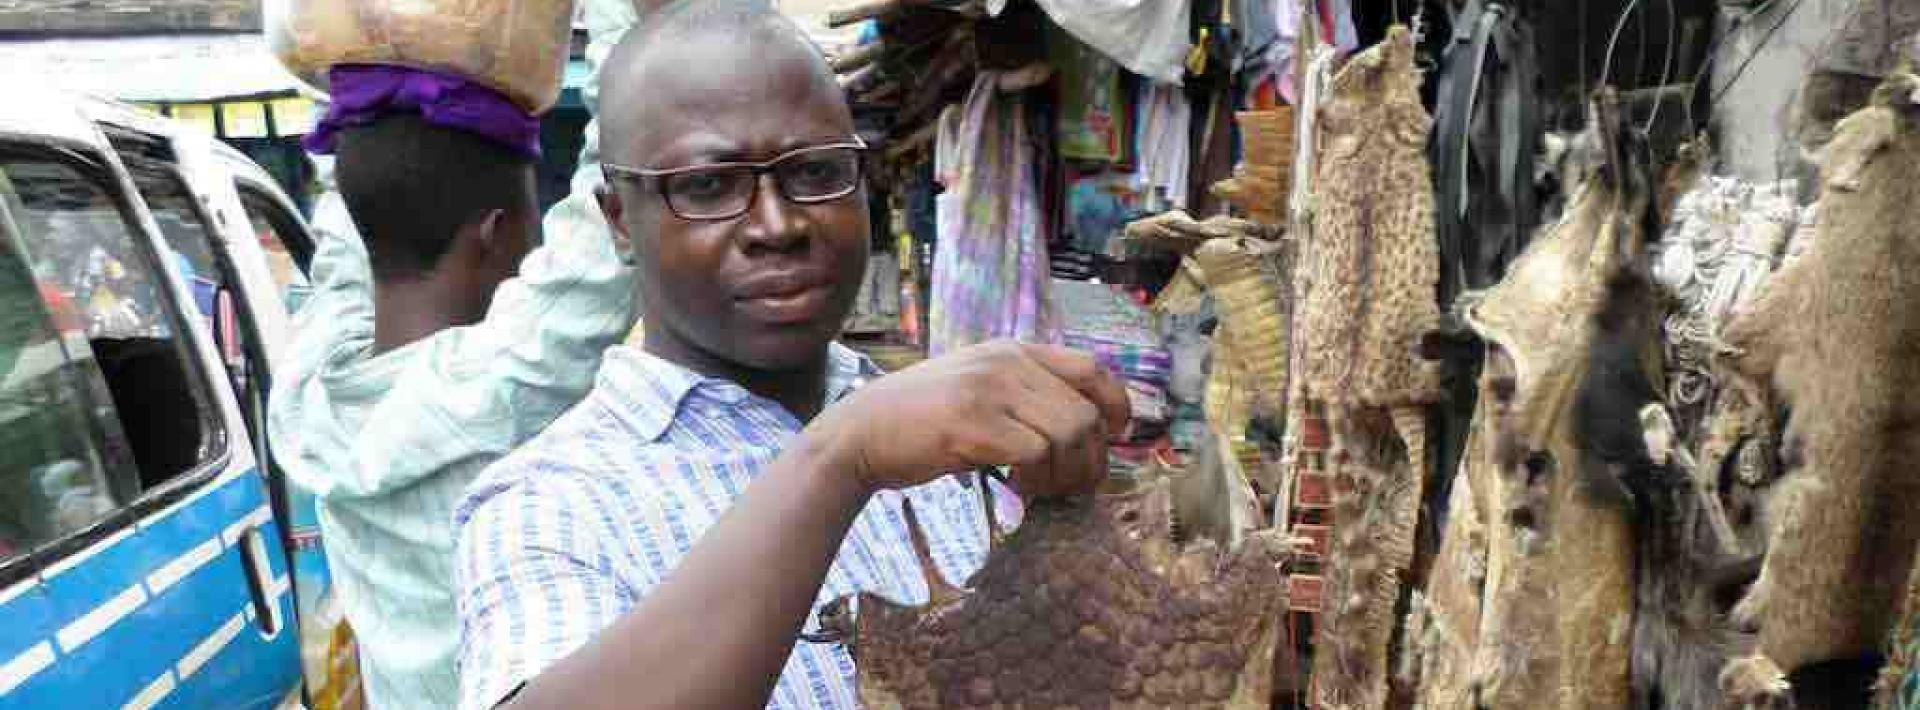 The traditions and beliefs threatening the endangered pangolin